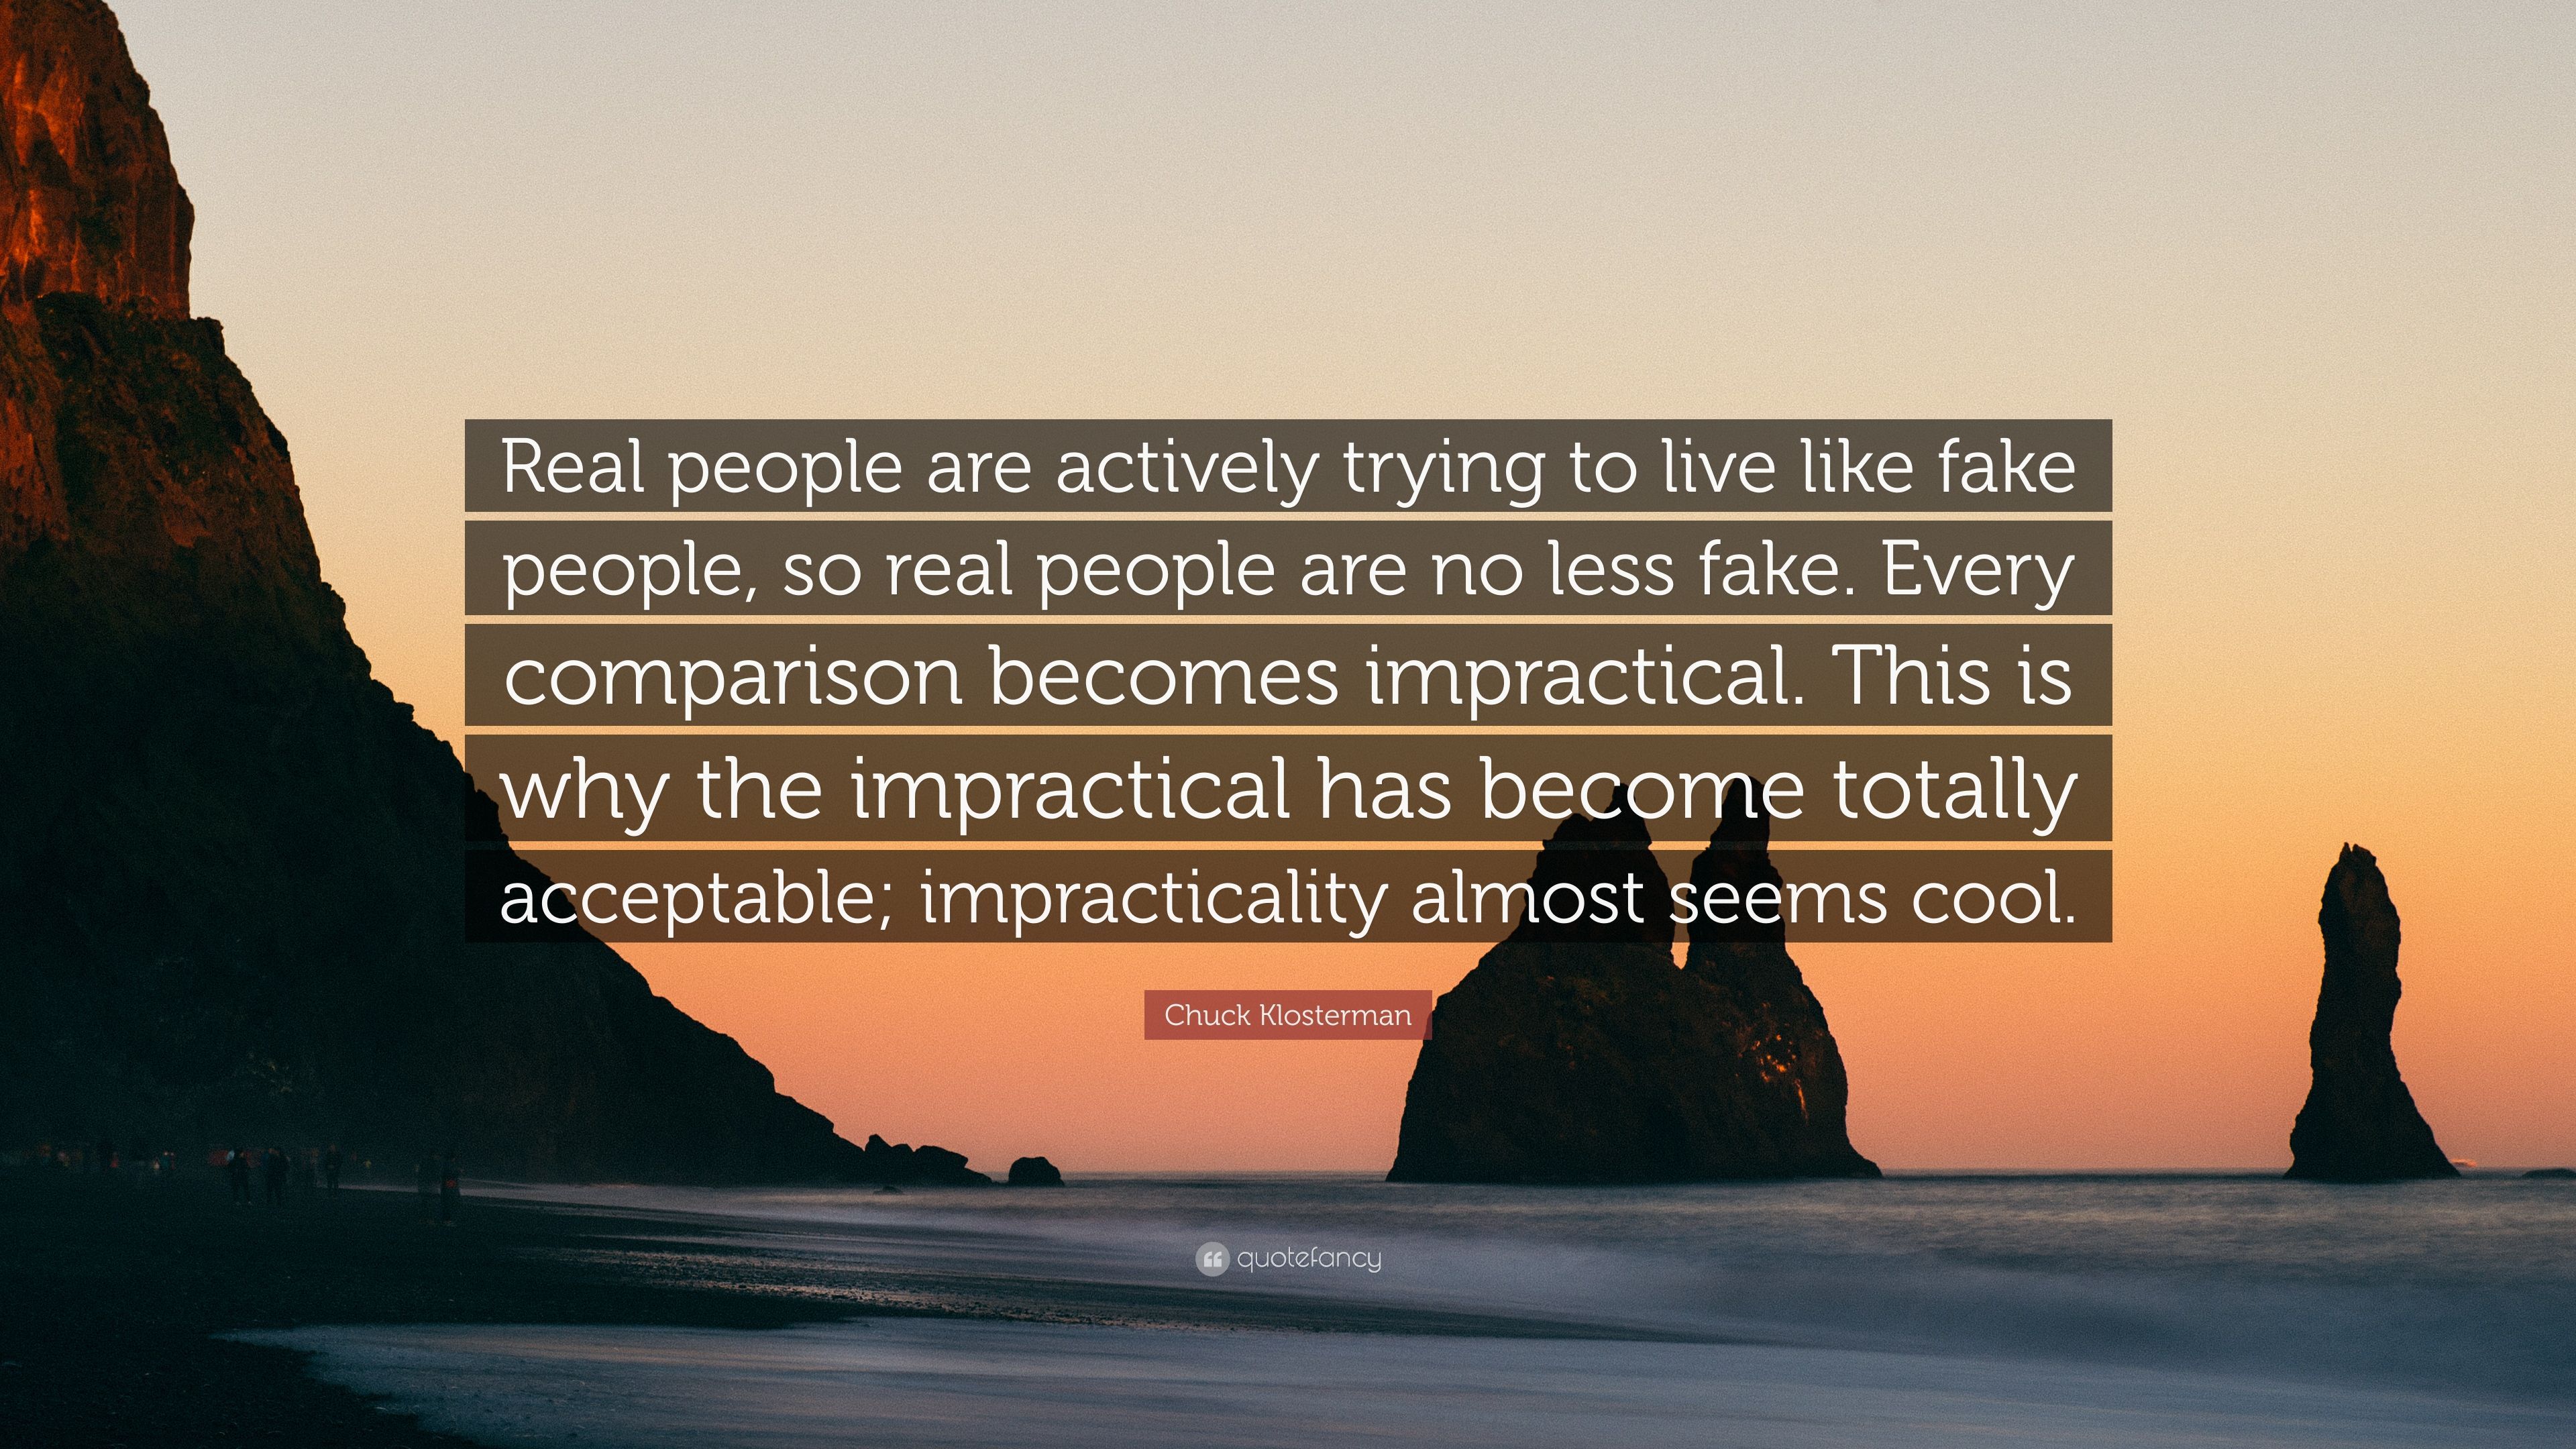 Chuck Klosterman Quote: “Real people are actively trying to live like fake people, so real people are no less fake. Every comparison becomes impr.” (6 wallpaper)